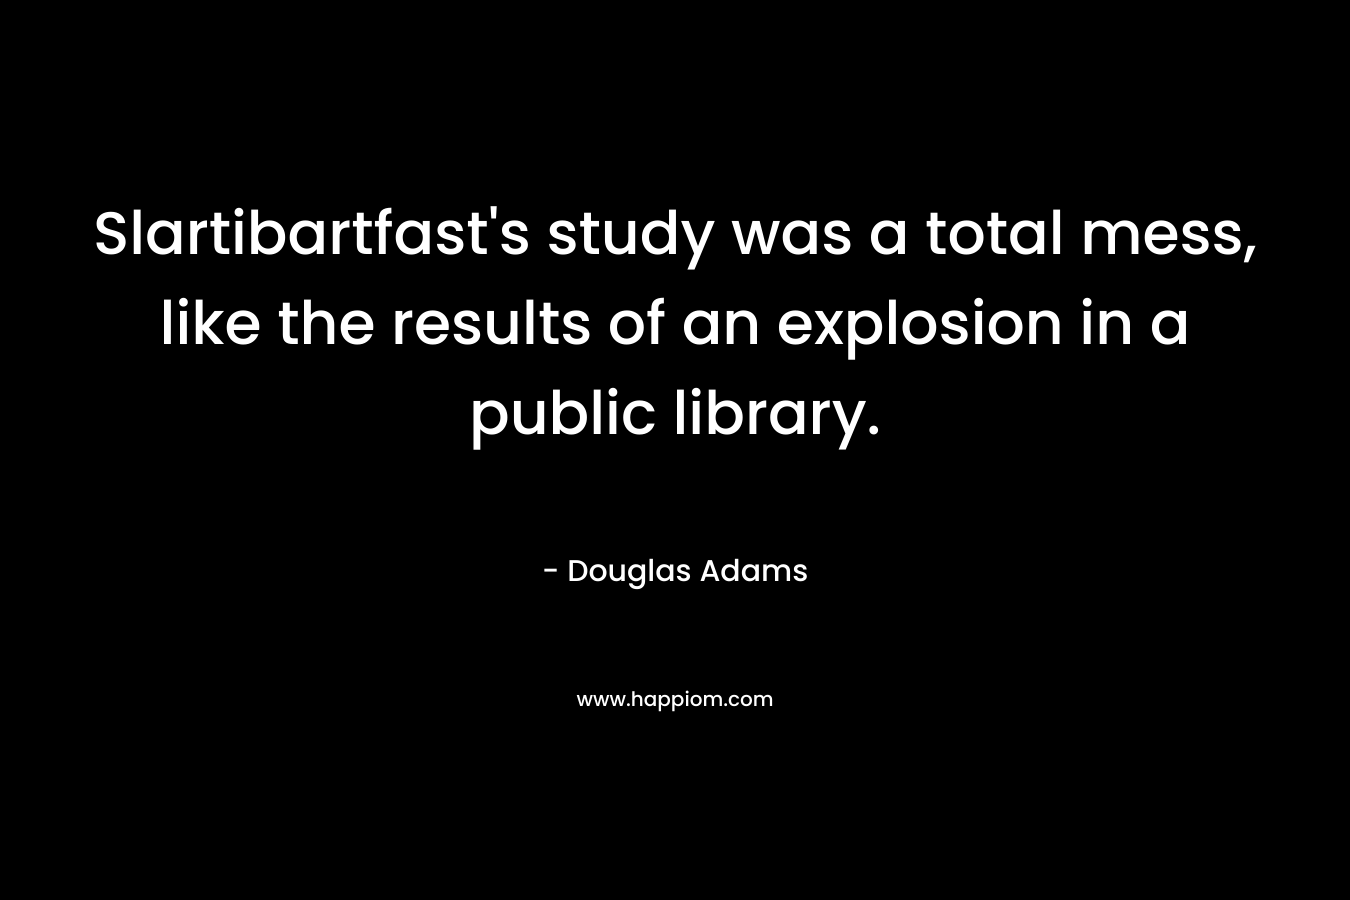 Slartibartfast's study was a total mess, like the results of an explosion in a public library.